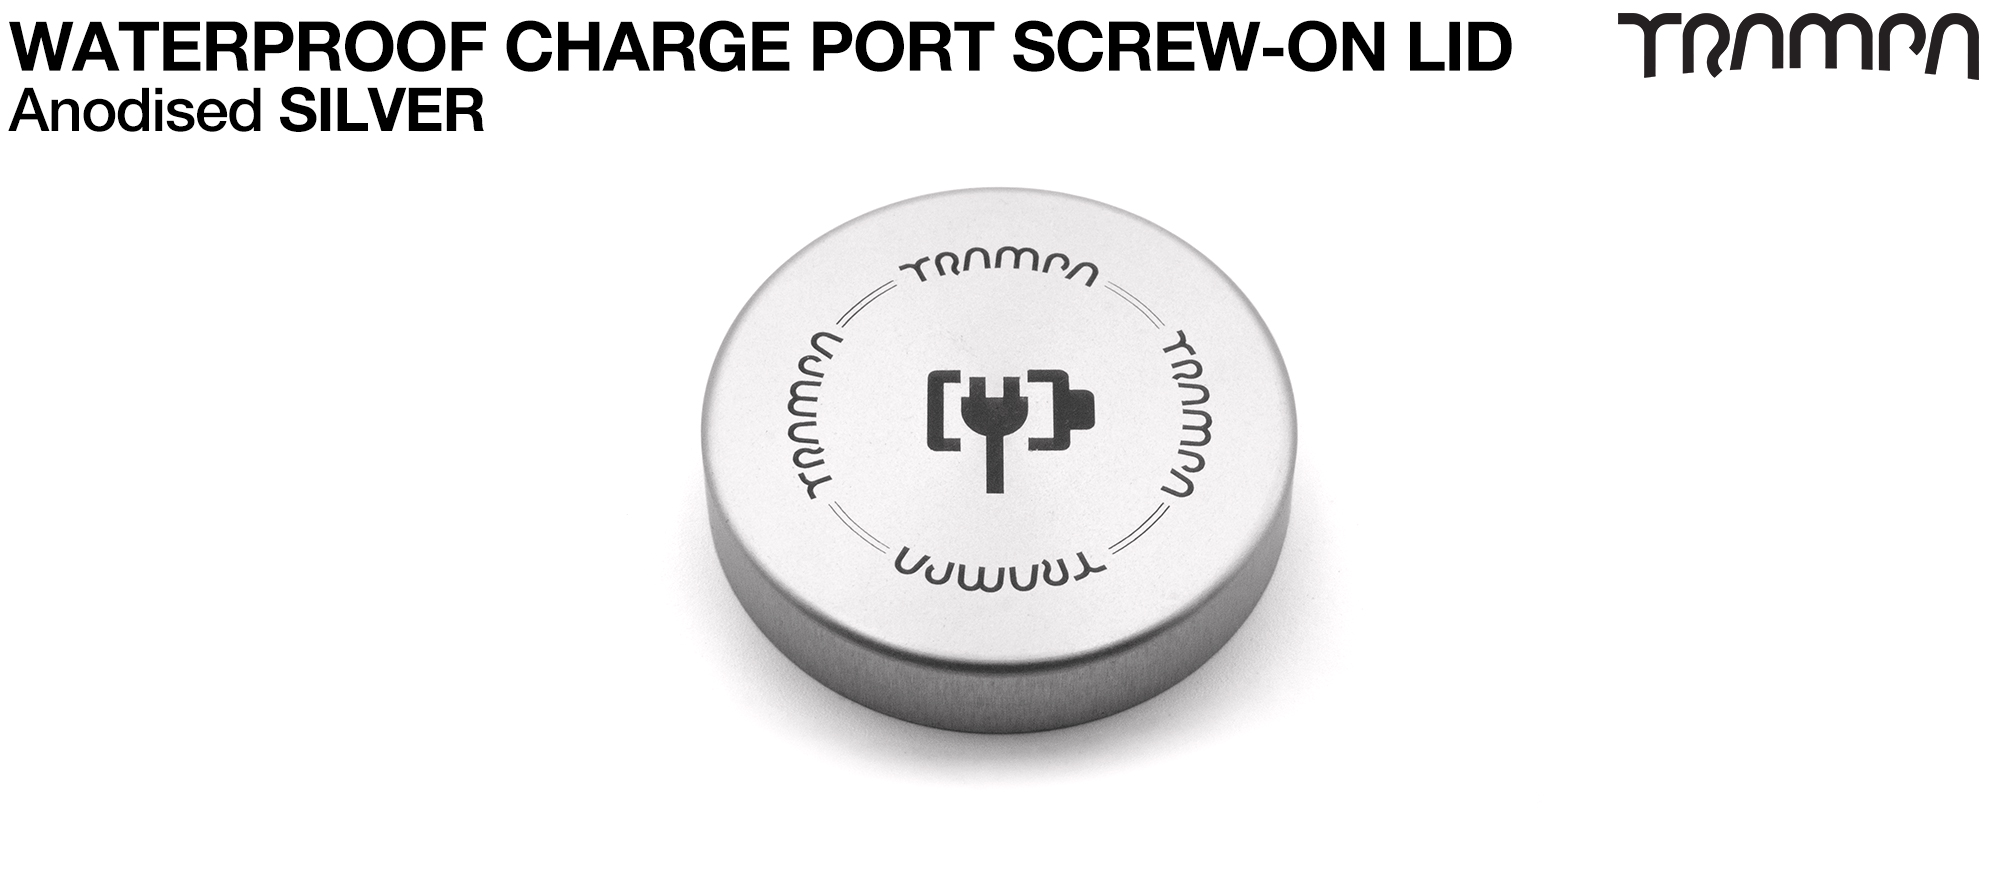 Charge Point TOP - Anodised SILVER